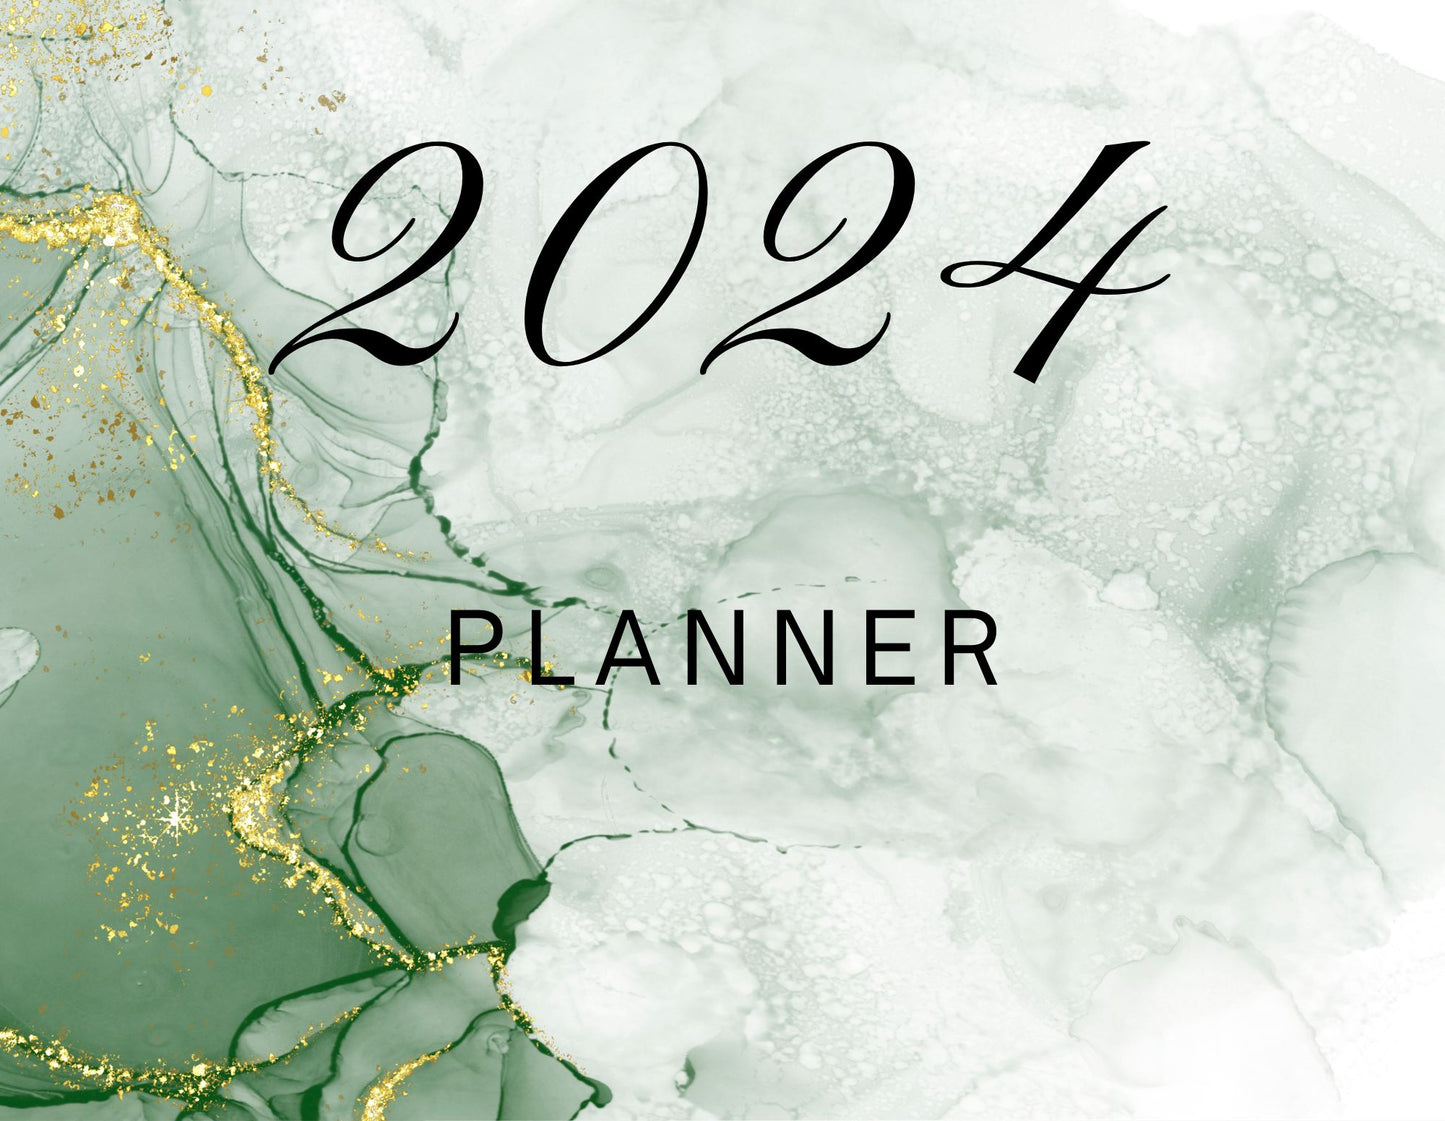 Stay organized and on track with My 2024 Planner. This expertly designed planner is perfect for your planning needs in the year 2024. With its user-friendly layout, you can easily schedule your days, set goals, and keep track of important events. Plus, its durable cover ensures long-lasting use. Make the most of your year with My 2024 Planner.